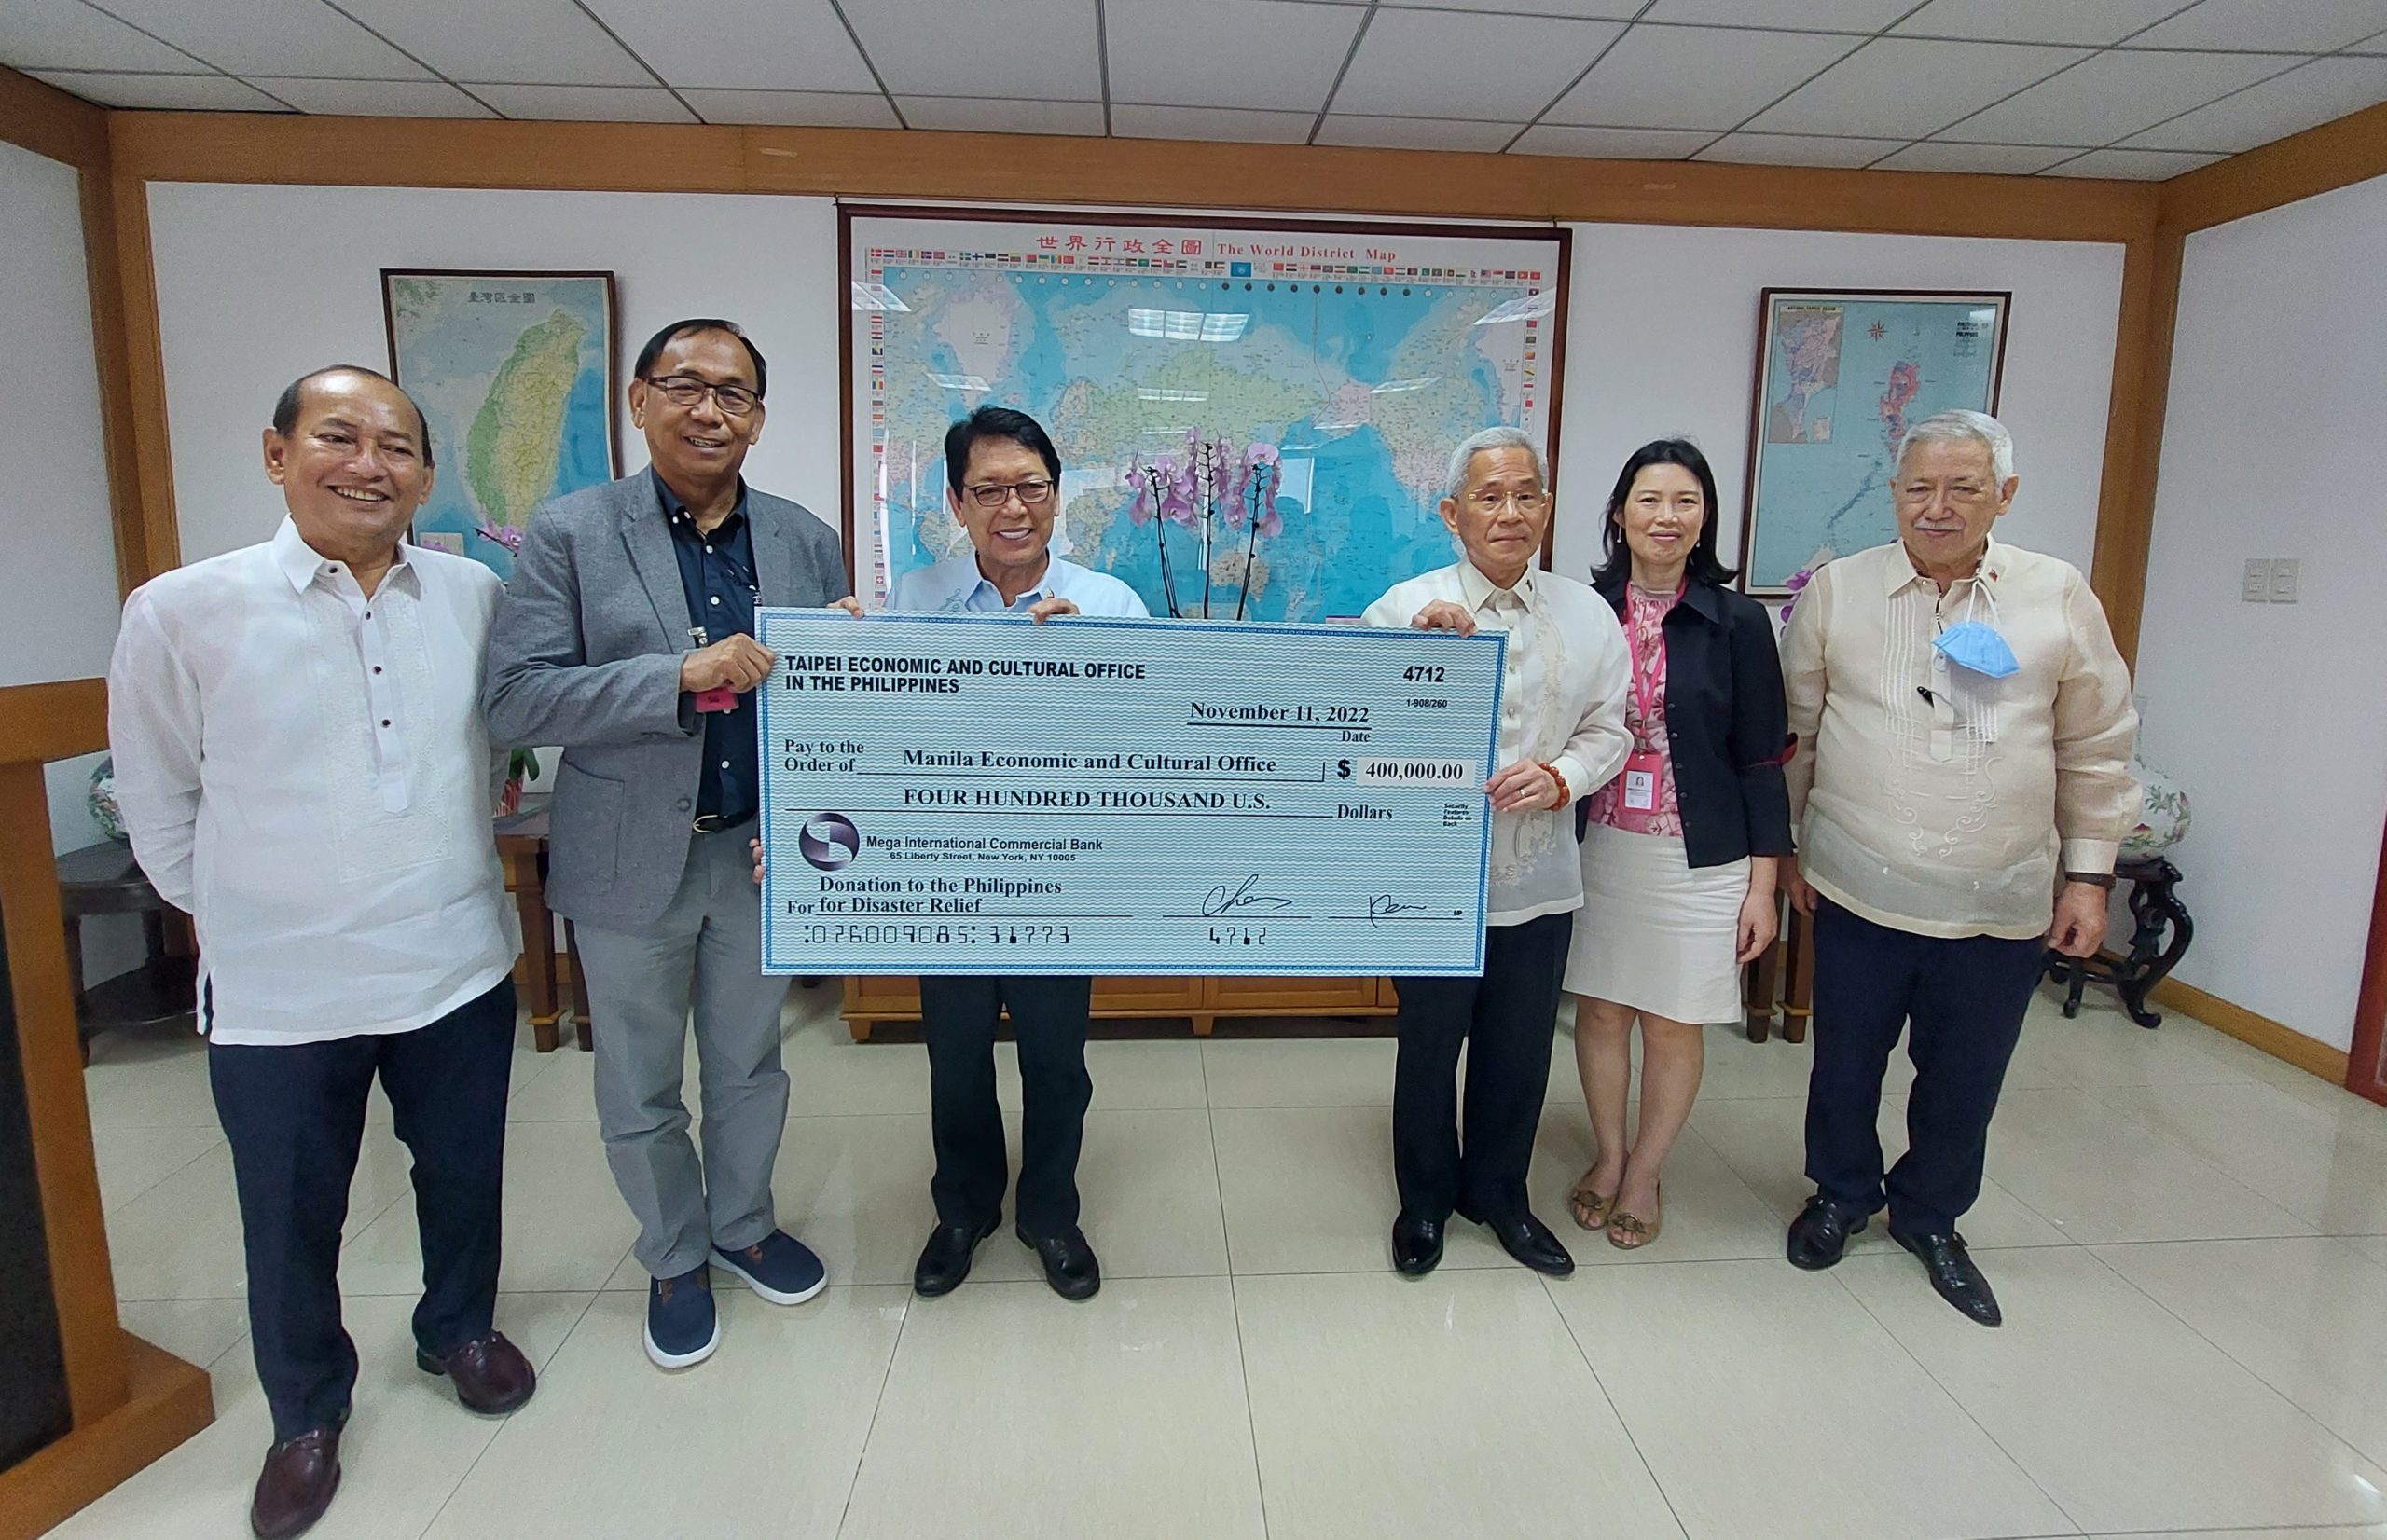 The Philippines gets P22.9 million from Taiwan as humanitarian assistance following the onslaught of Severe Tropical Storm Paeng.